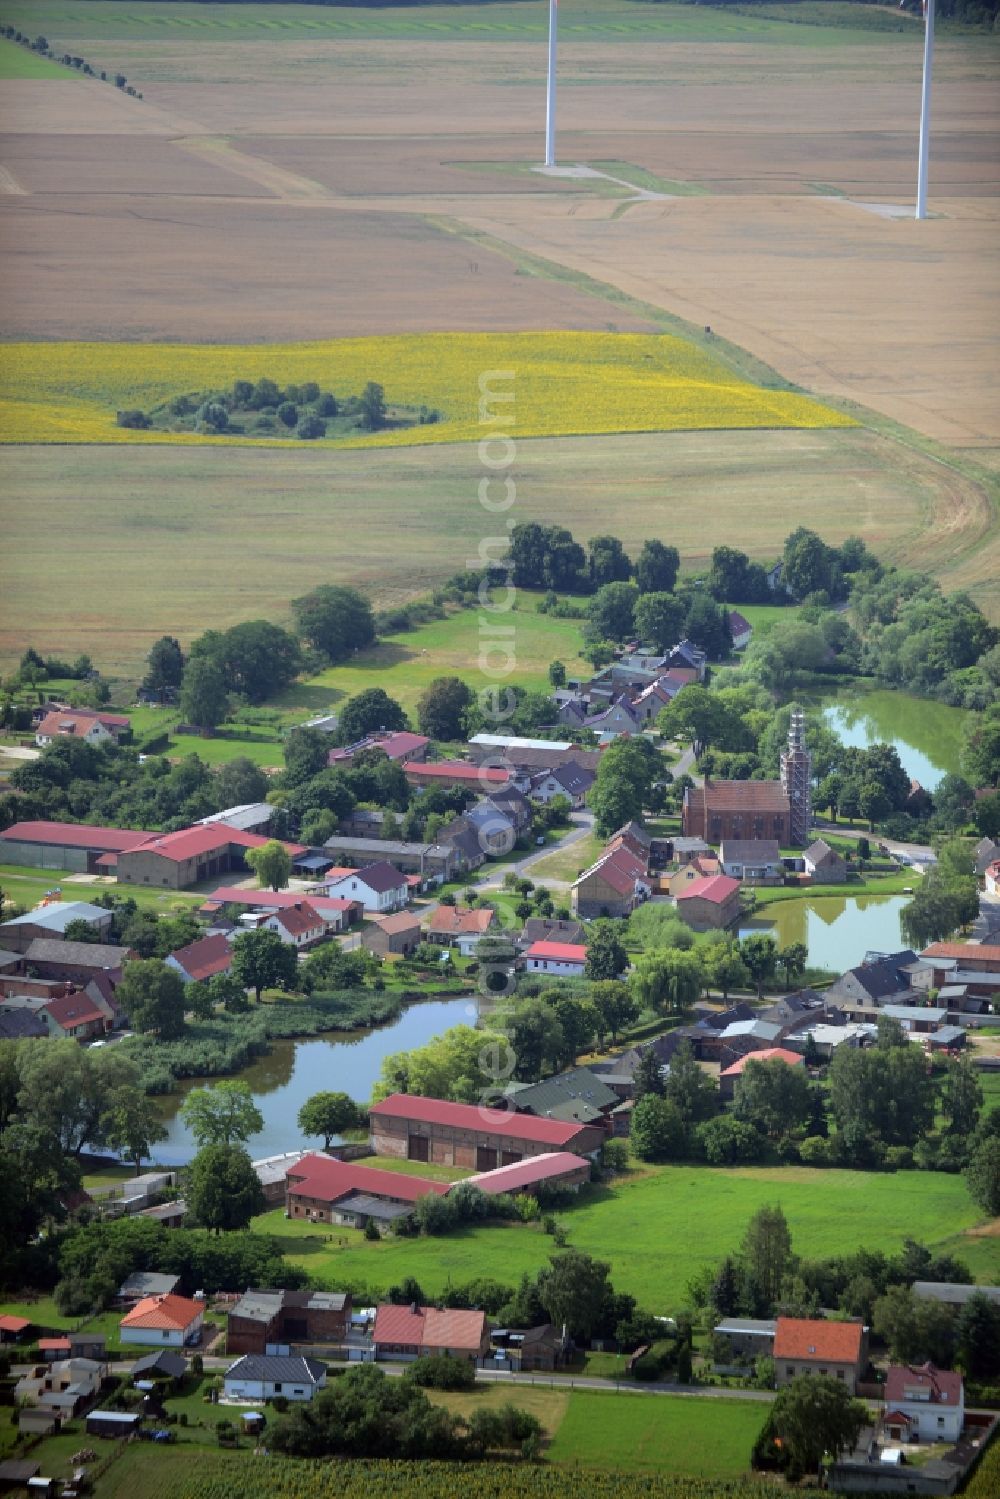 Aerial photograph Beiersdorf-Freudenberg - View of the Freudenberg part of the borough of Beiersdorf-Freudenberg in the state of Brandenburg. The borough is located in the county district of Maerkisch-Oderland and consists of two parts. Freudenberg is a village around two ponds in its centre and consists of residential buildings, a church and small farm estates. Wind turbines are located in the background